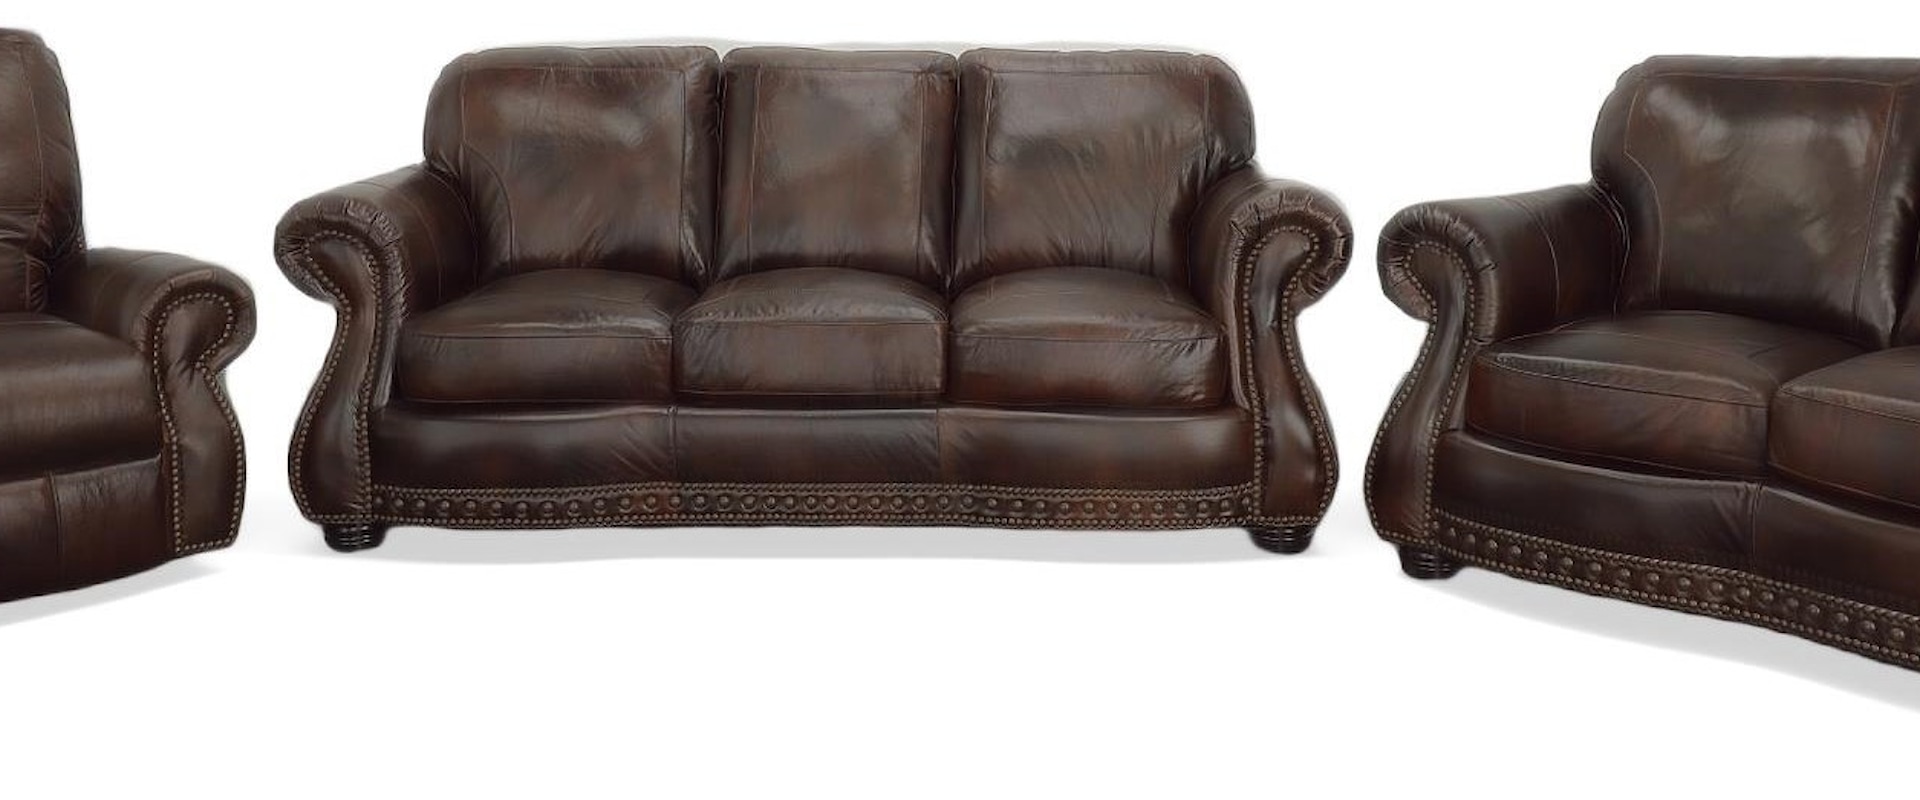 Cowboy Chesterfield Leather Set